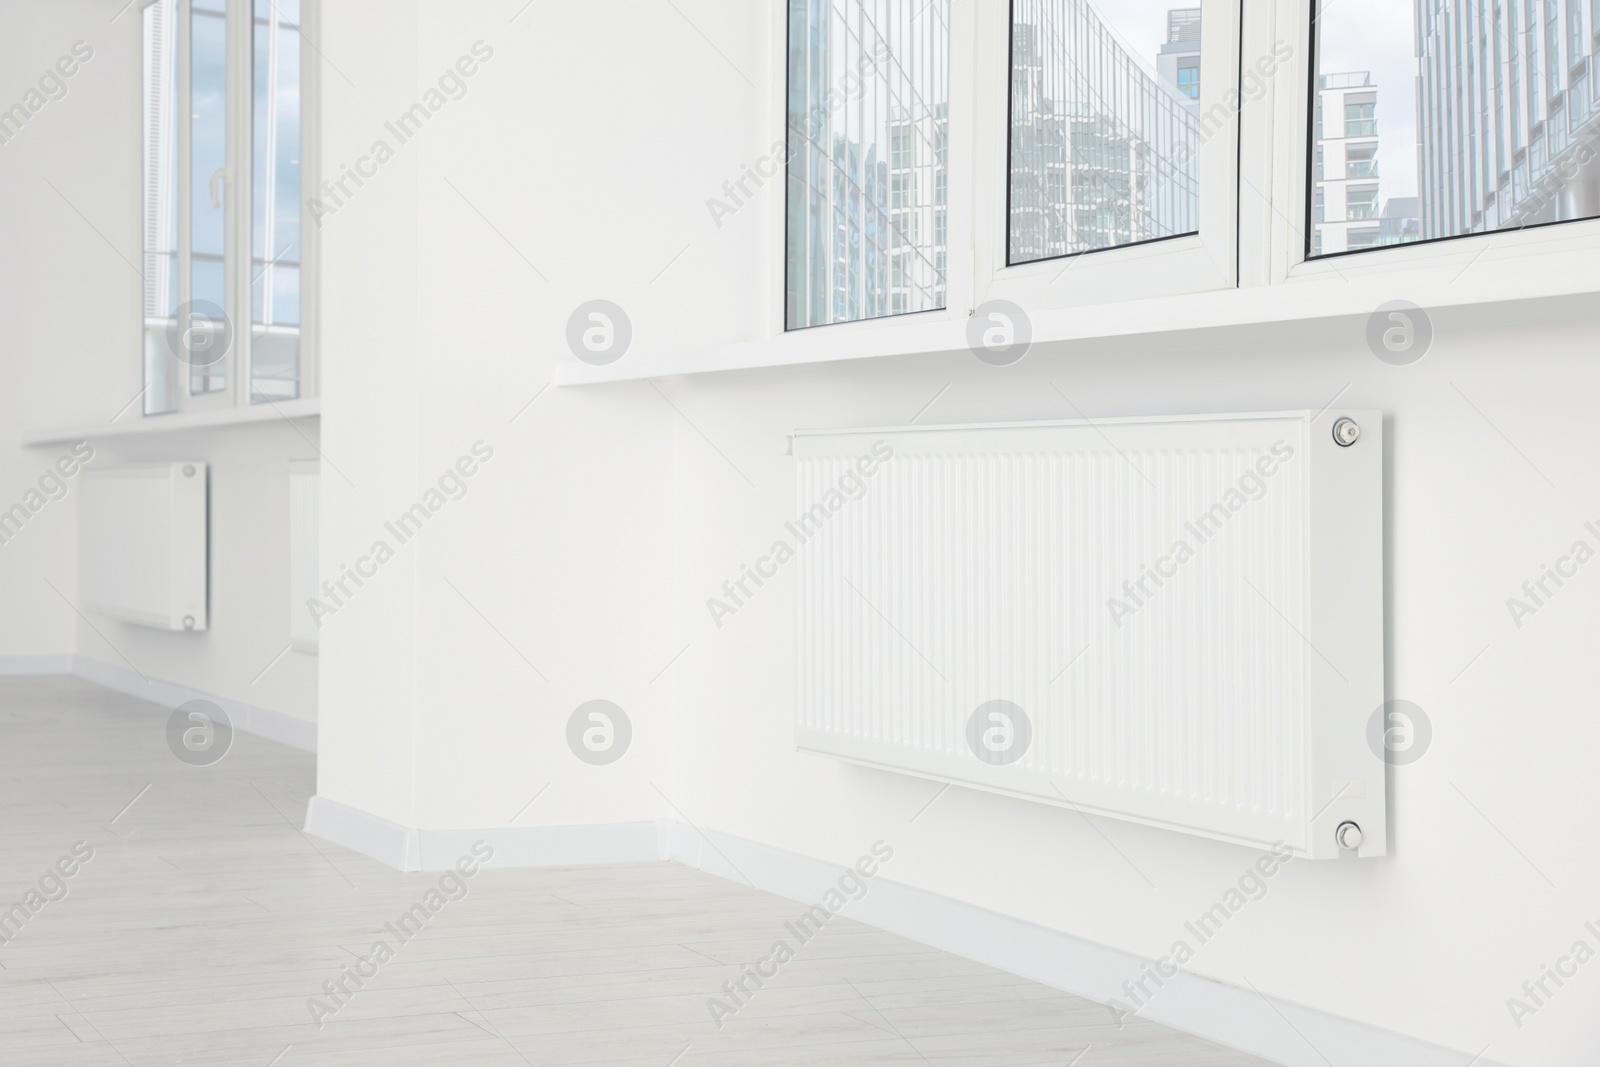 Photo of Modern office room with radiators and windows. Interior design